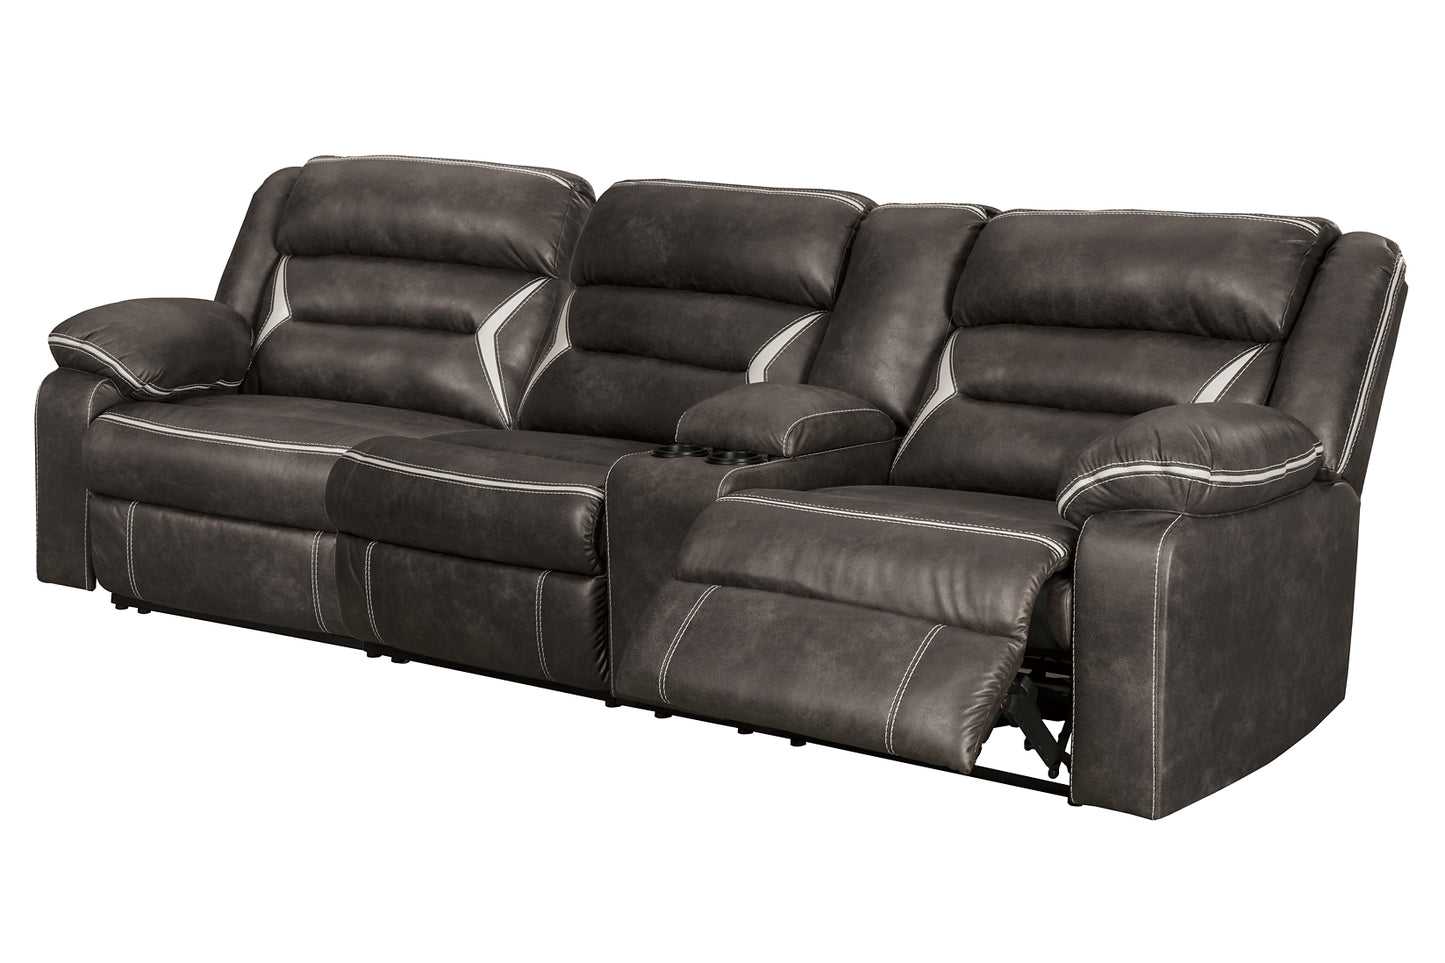 Kincord 2-Piece Power Reclining Sectional Sofa